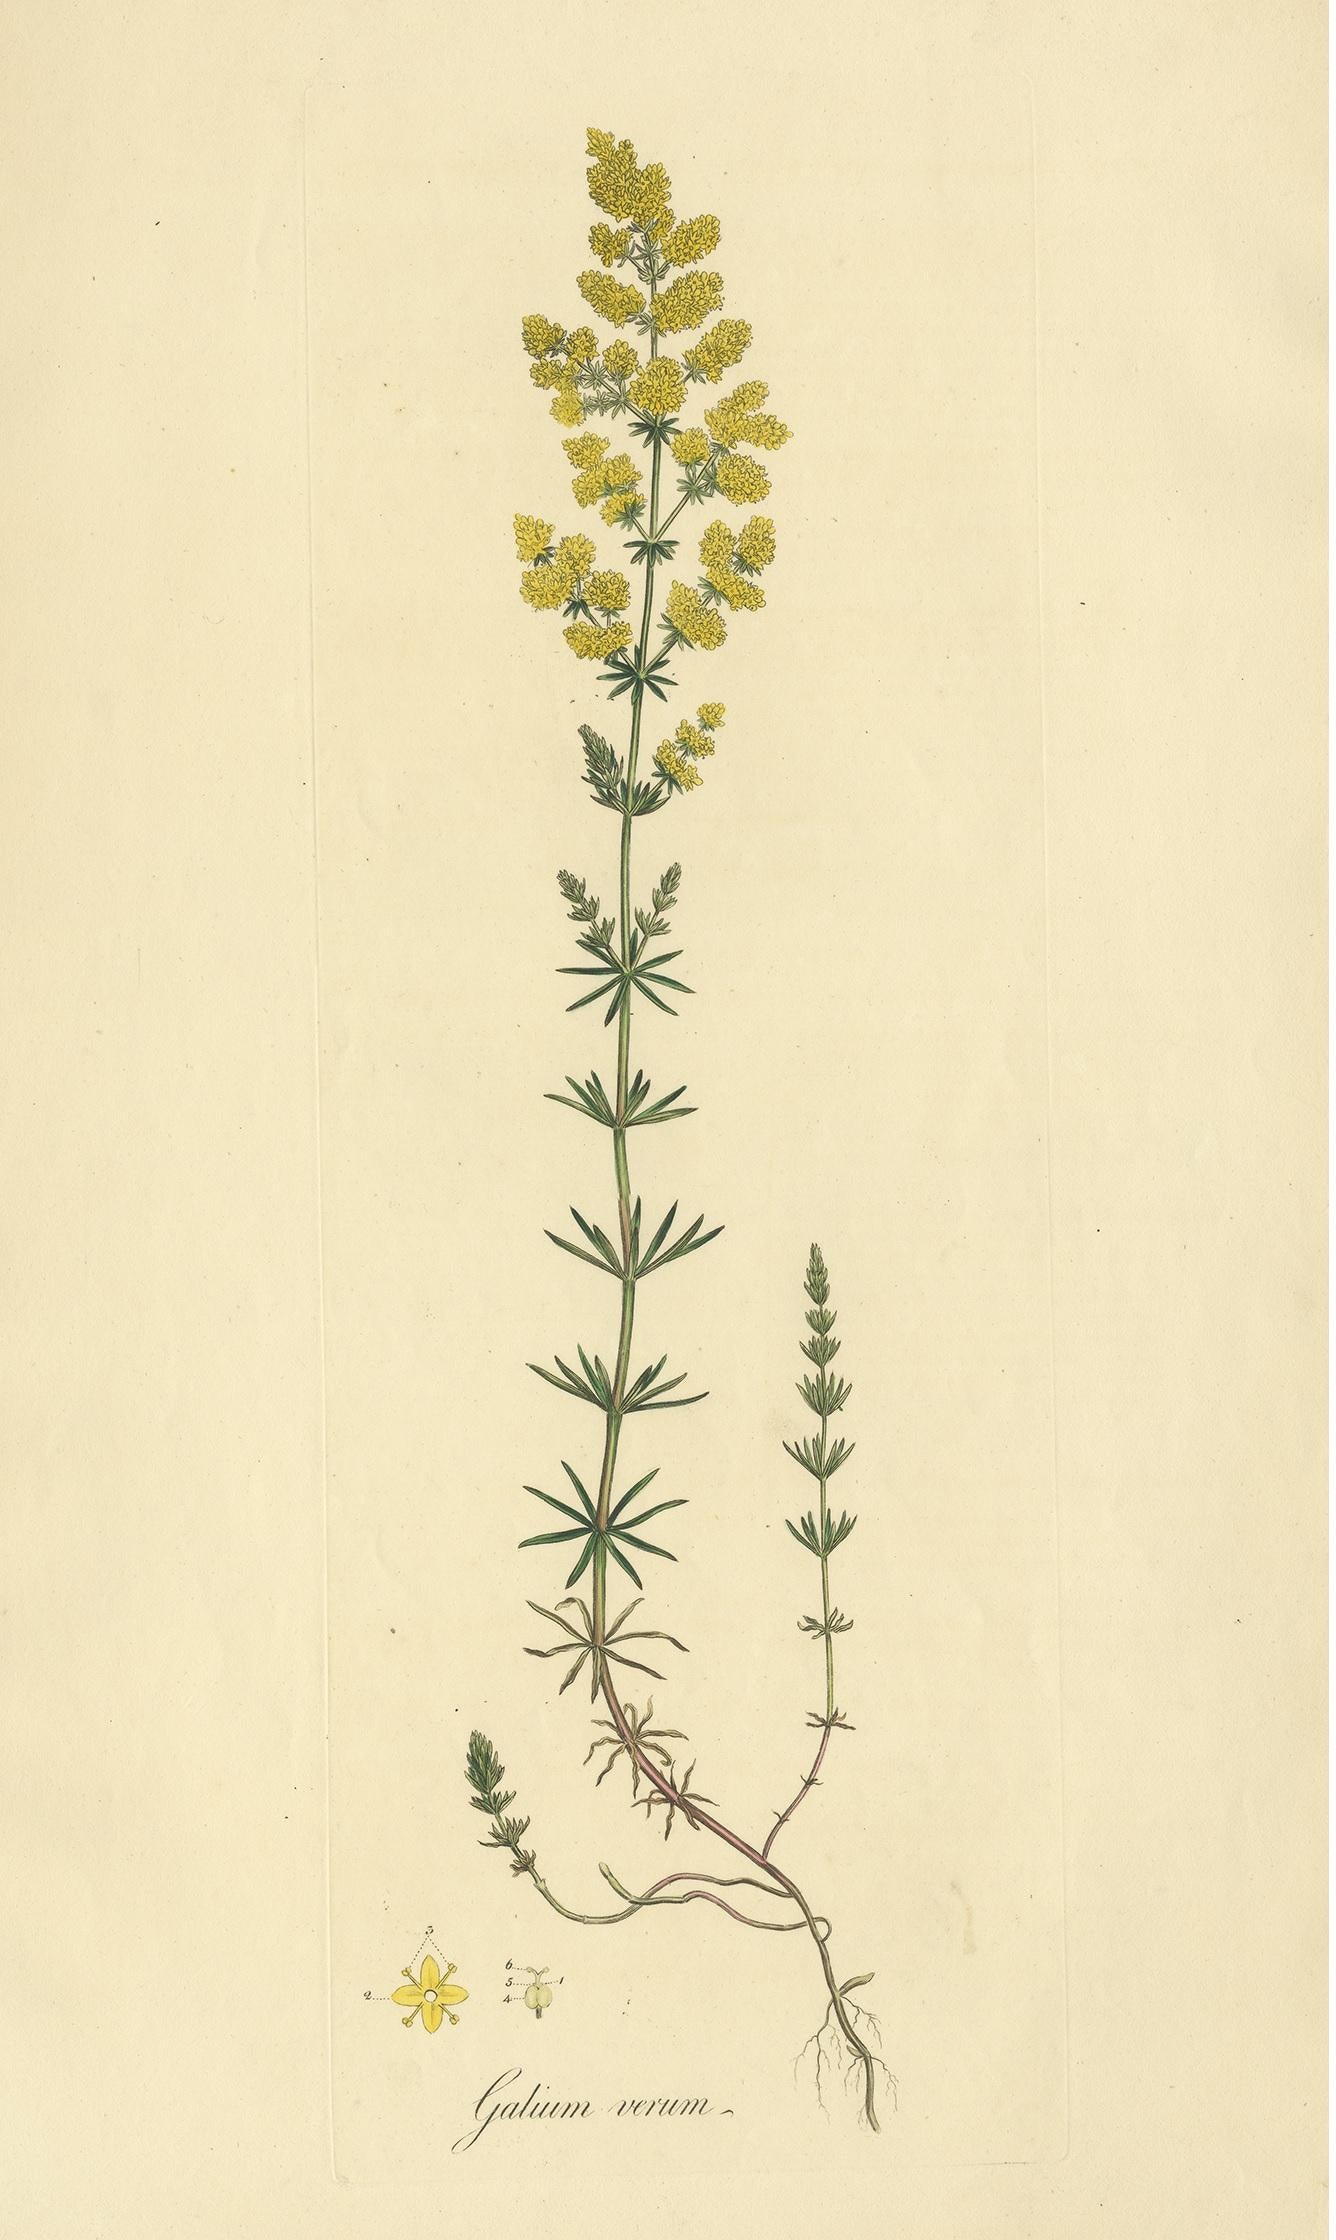 Antique botany print titled 'Galium Verum'. Hand colored engraving of galium verum, a herbaceous perennial plant of the family Rubiaceae. This print originates from 'Flora Londinensis' by William Curtis.